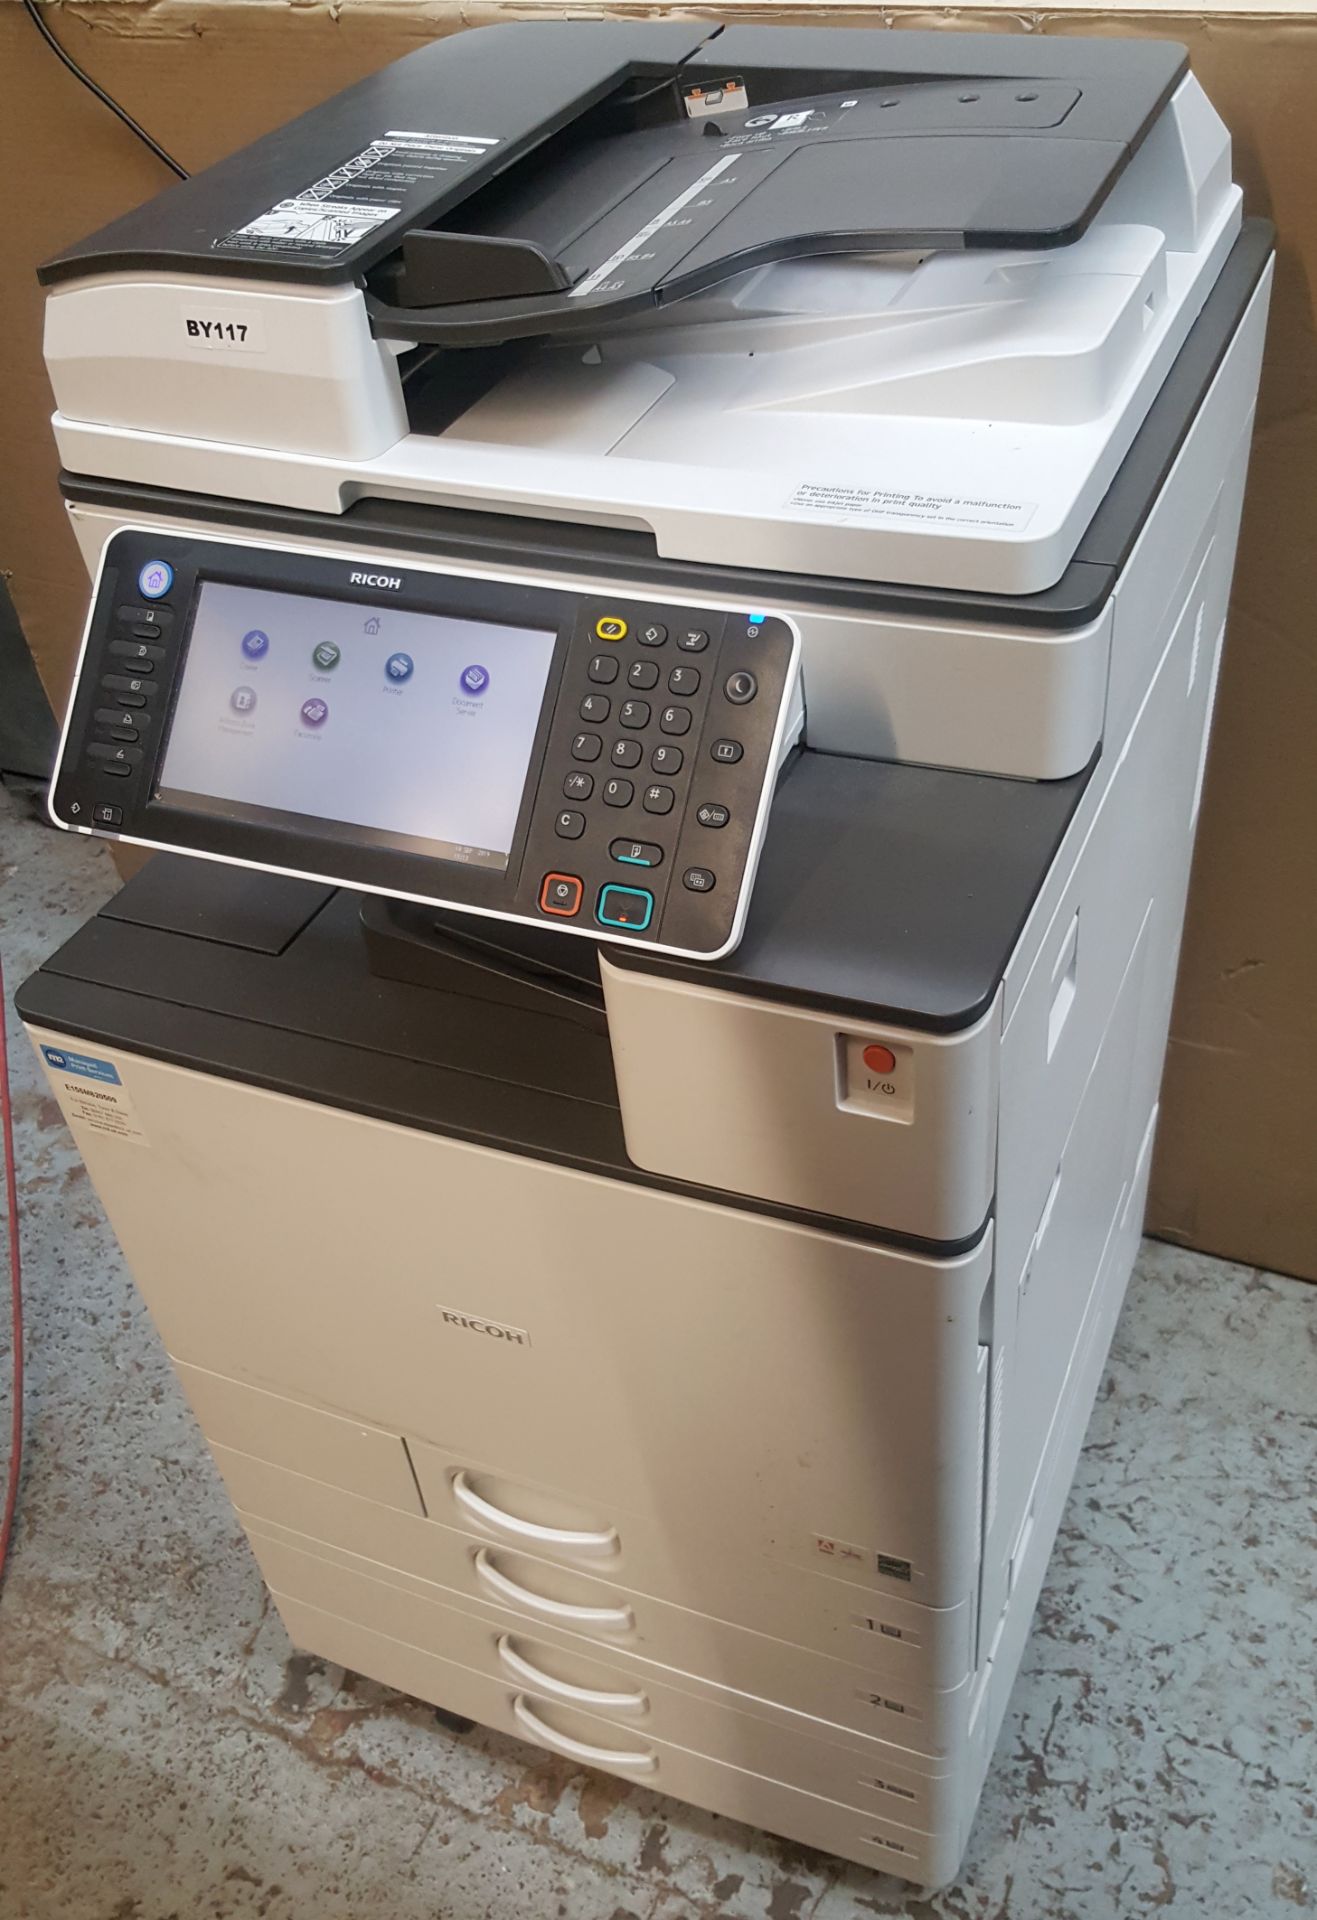 1 x RICOH MP C3003 Color Laser Multifunction Office Printer - Ref BY117 - Image 2 of 7